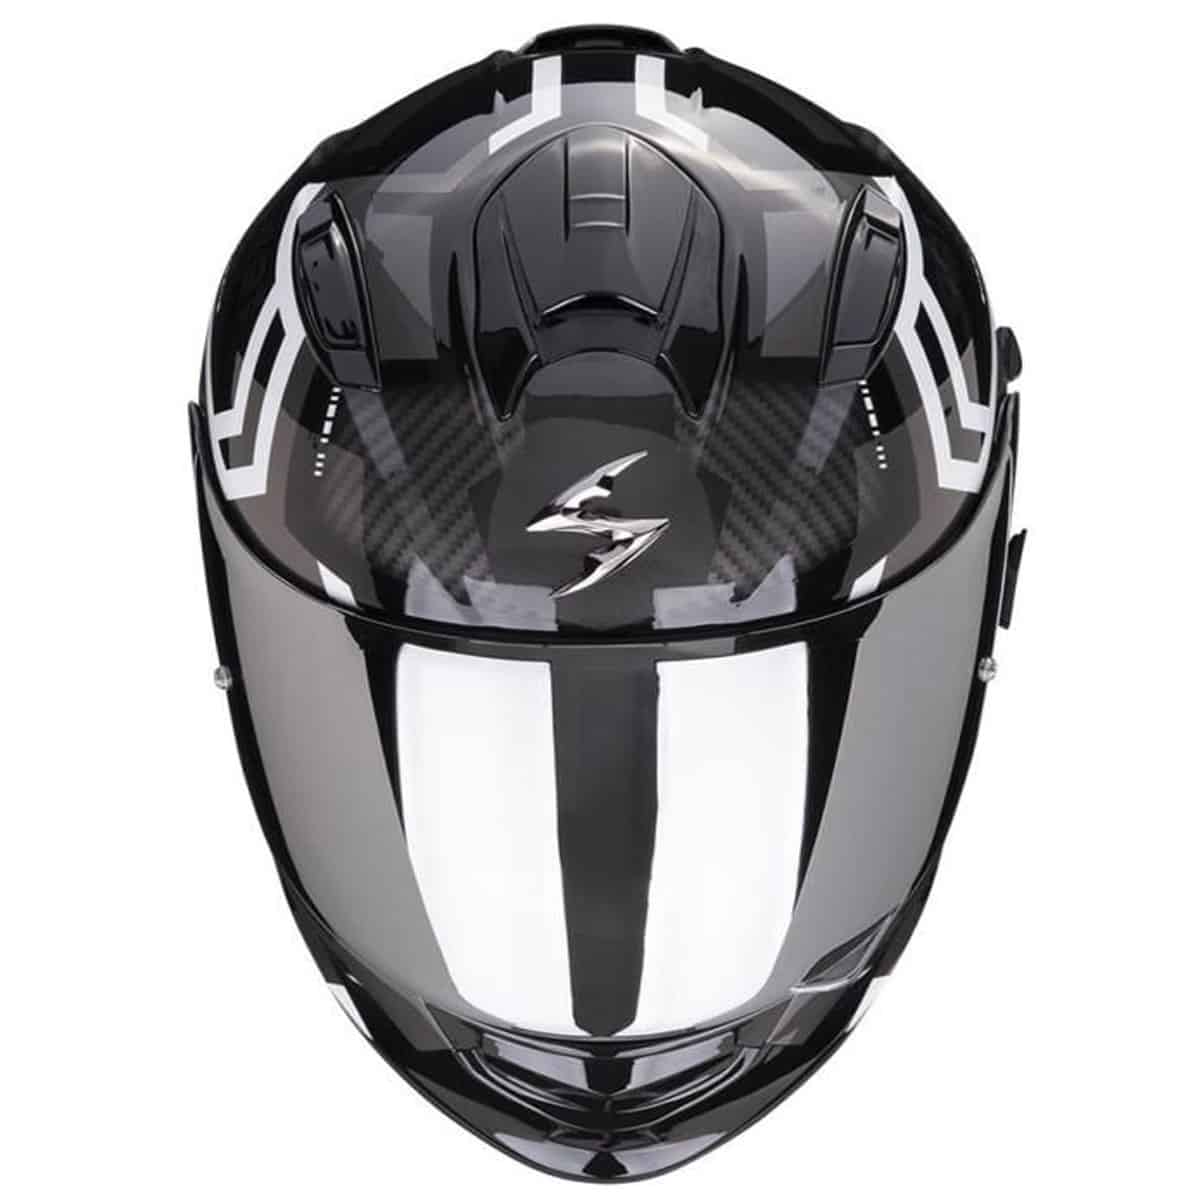 Scorpion Exo 491 black white: Entry level full face motorcycle helmet with drop down-3